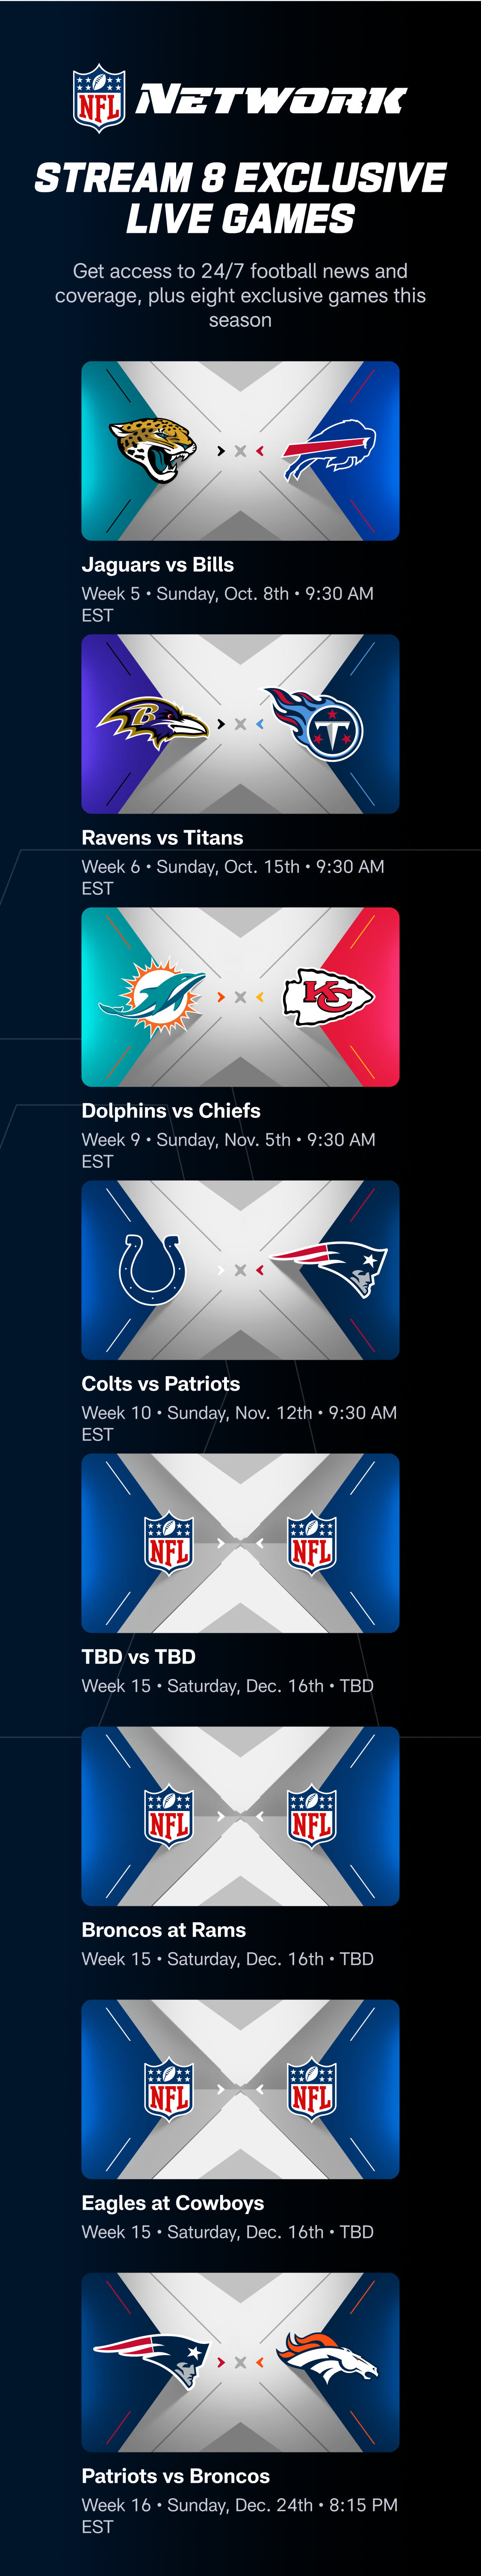 what channel is showing nfl games today